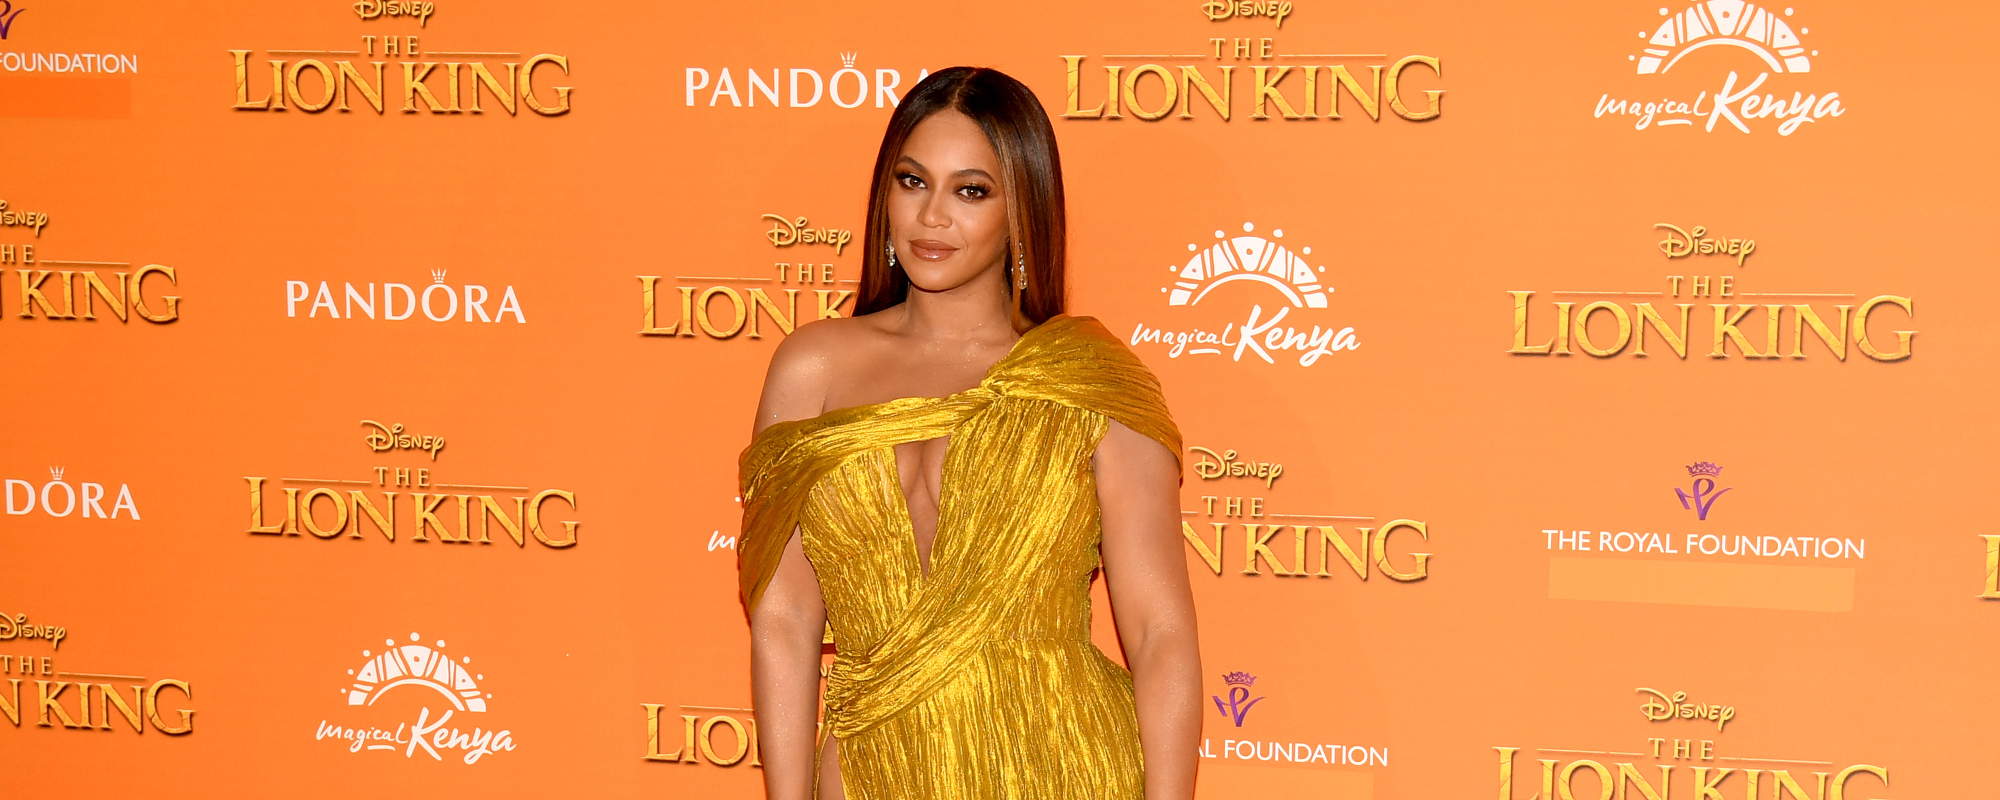 Beyoncé Details Renaissance Film as “One of the Hardest Projects” She’s Done in Lengthy Instagram Post